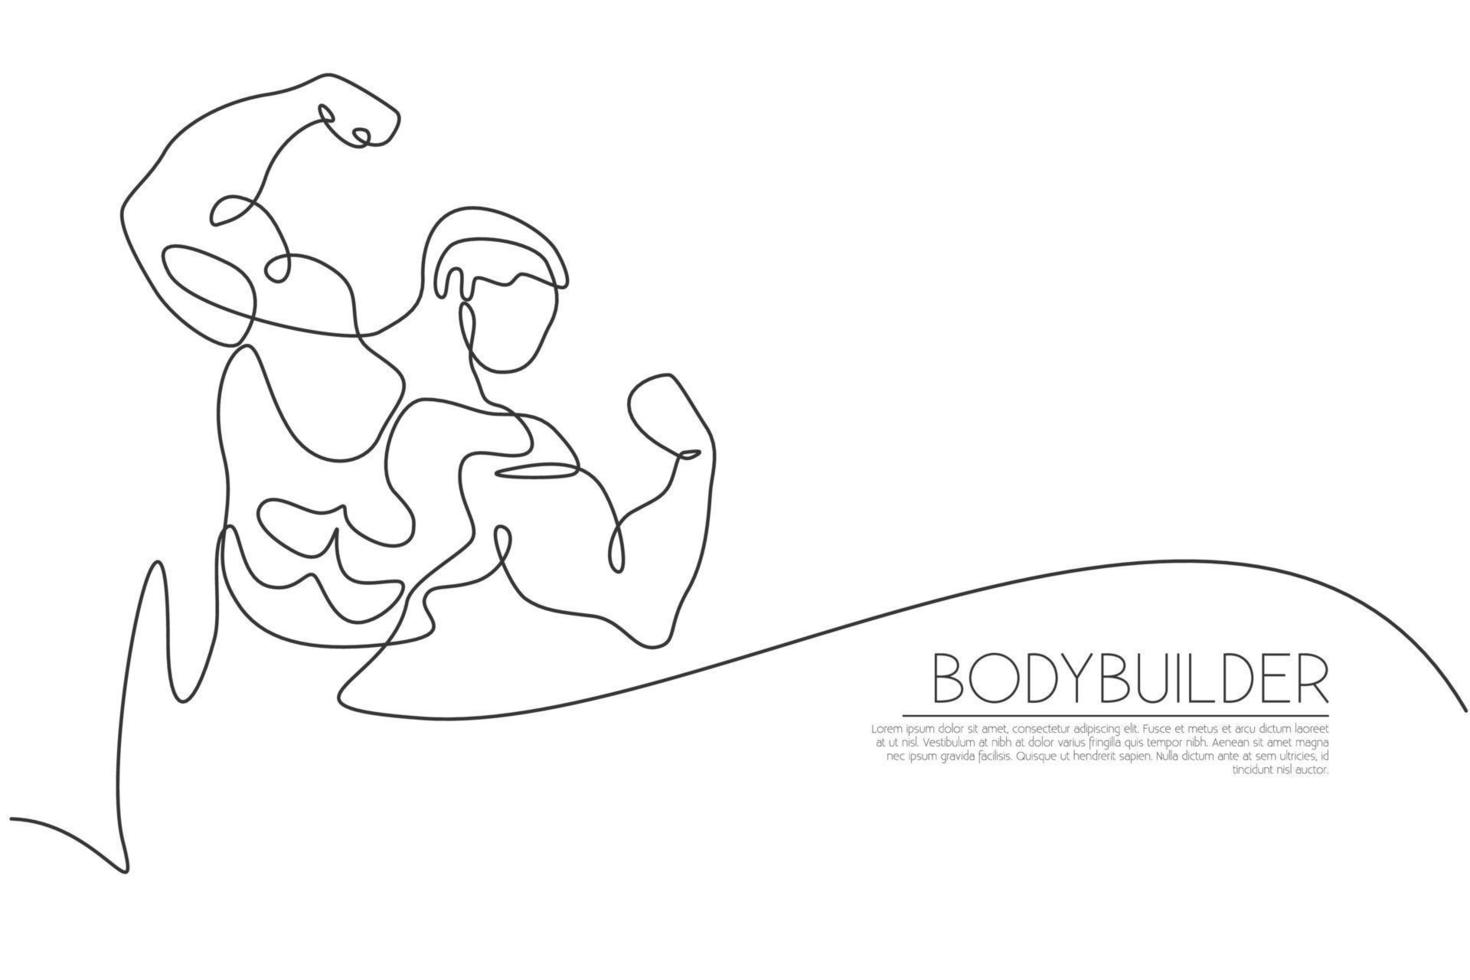 One single line drawing of young energetic model man bodybuilder posed vector illustration. Healthy workout concept. Modern continuous line draw design for bodybuilding fitness center club logo icon